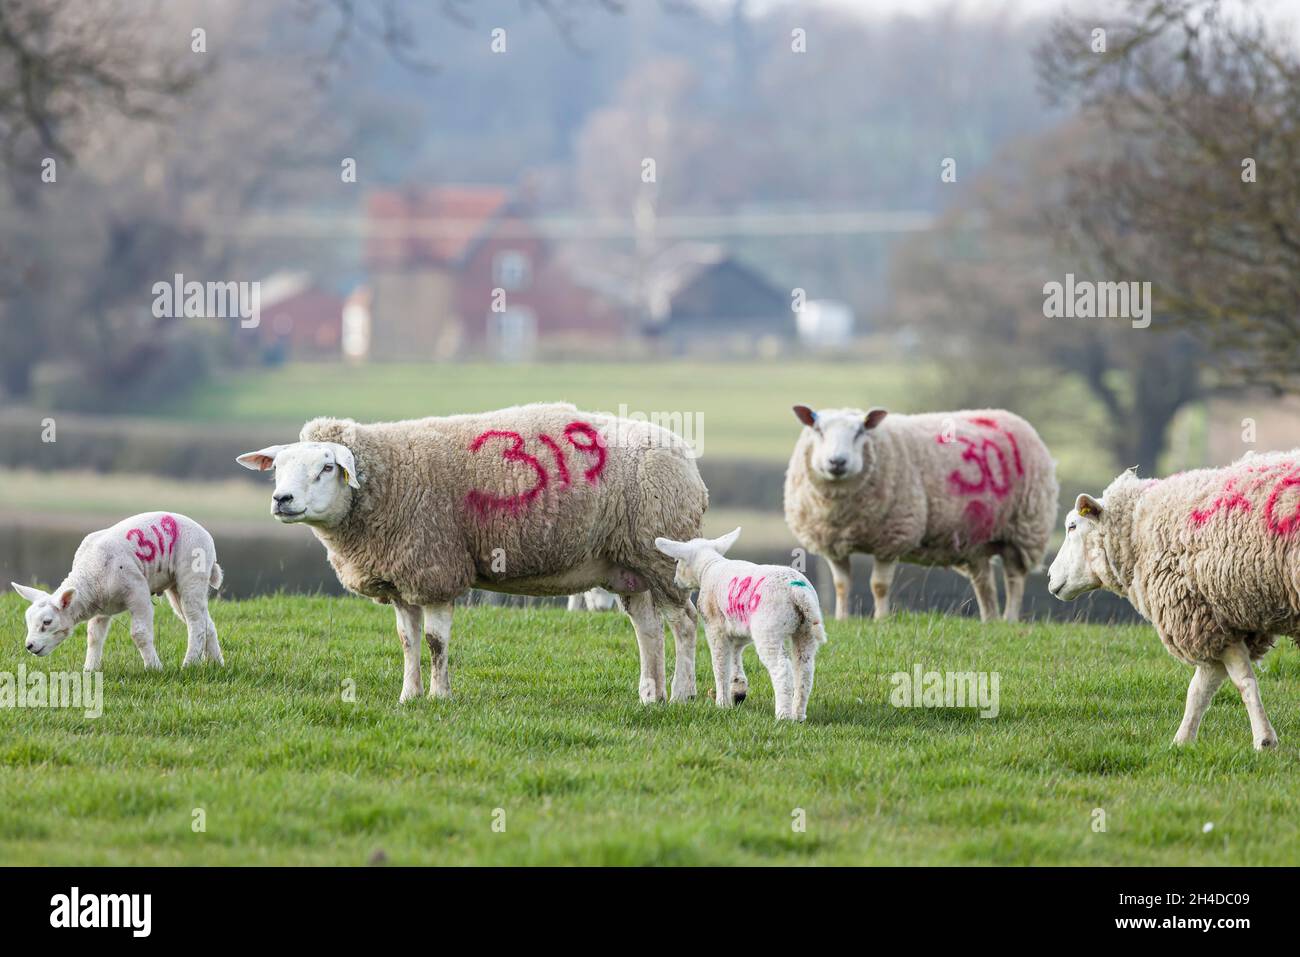 Flock of sheep with lambs in a field on farm. Buckinghamshire, UK countryside. The sheep are numbered for identification. (Counting sheep concept) Stock Photo